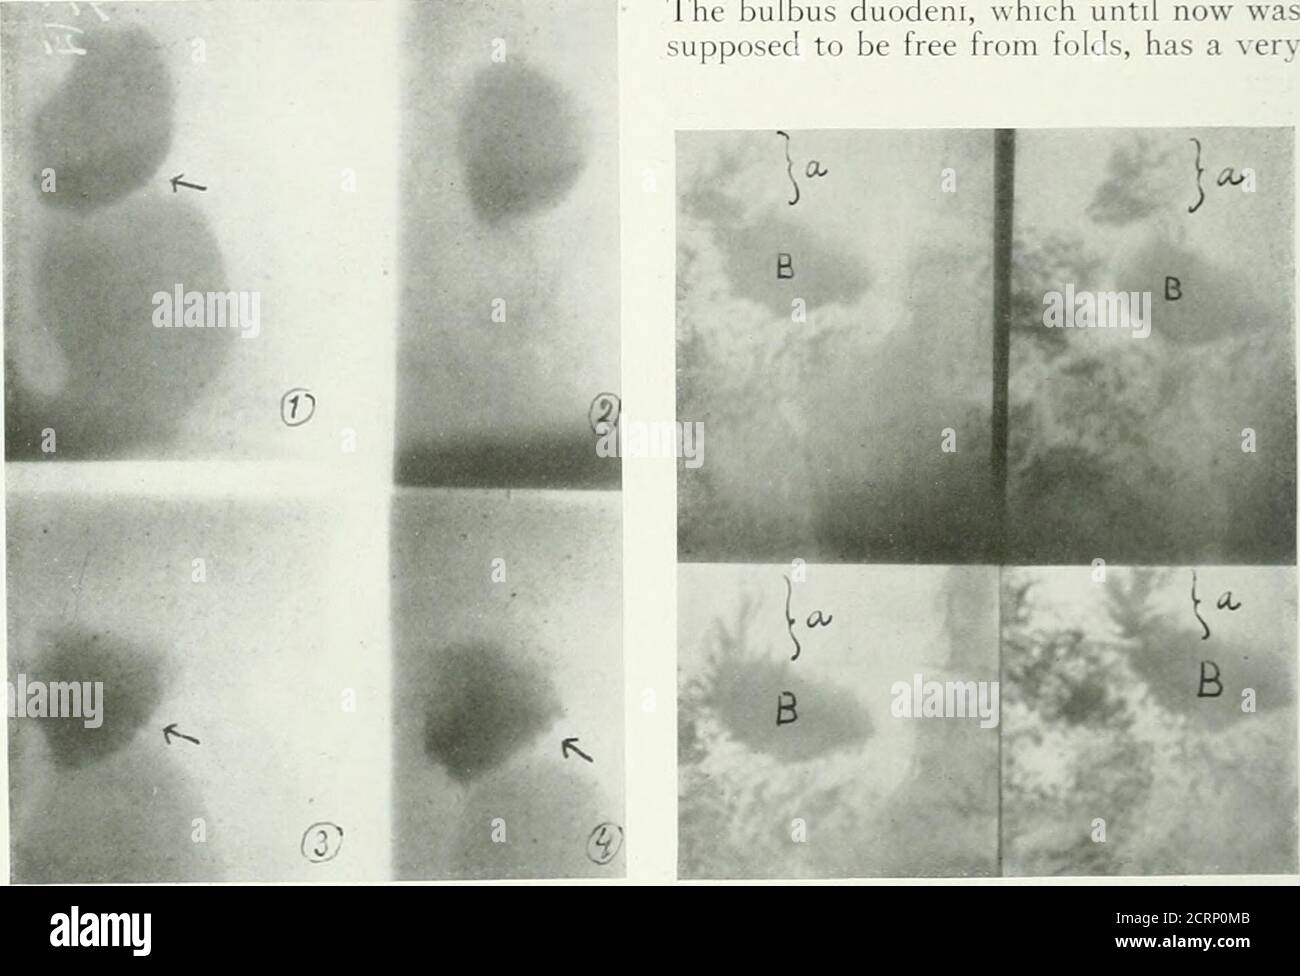 . The American journal of roentgenology, radium therapy and nuclear medicine . sfree from folds of the mucous membrane,and diflerent anatomical forms are attrib-uted to the valvulae conniventes of the 92 Mechanism of Movement of the Mucous Membrane of the Digestive Tract duodenum and the small intestines. Allthought of a change of form of the foldsof the mucous membrane, on account of amovement of their own, has been com-pletely ignored. But a closer study of thestructure of the relief of the folds of themucous membrane of the intestines onanatomical preparations and on the livingintestines wi Stock Photo